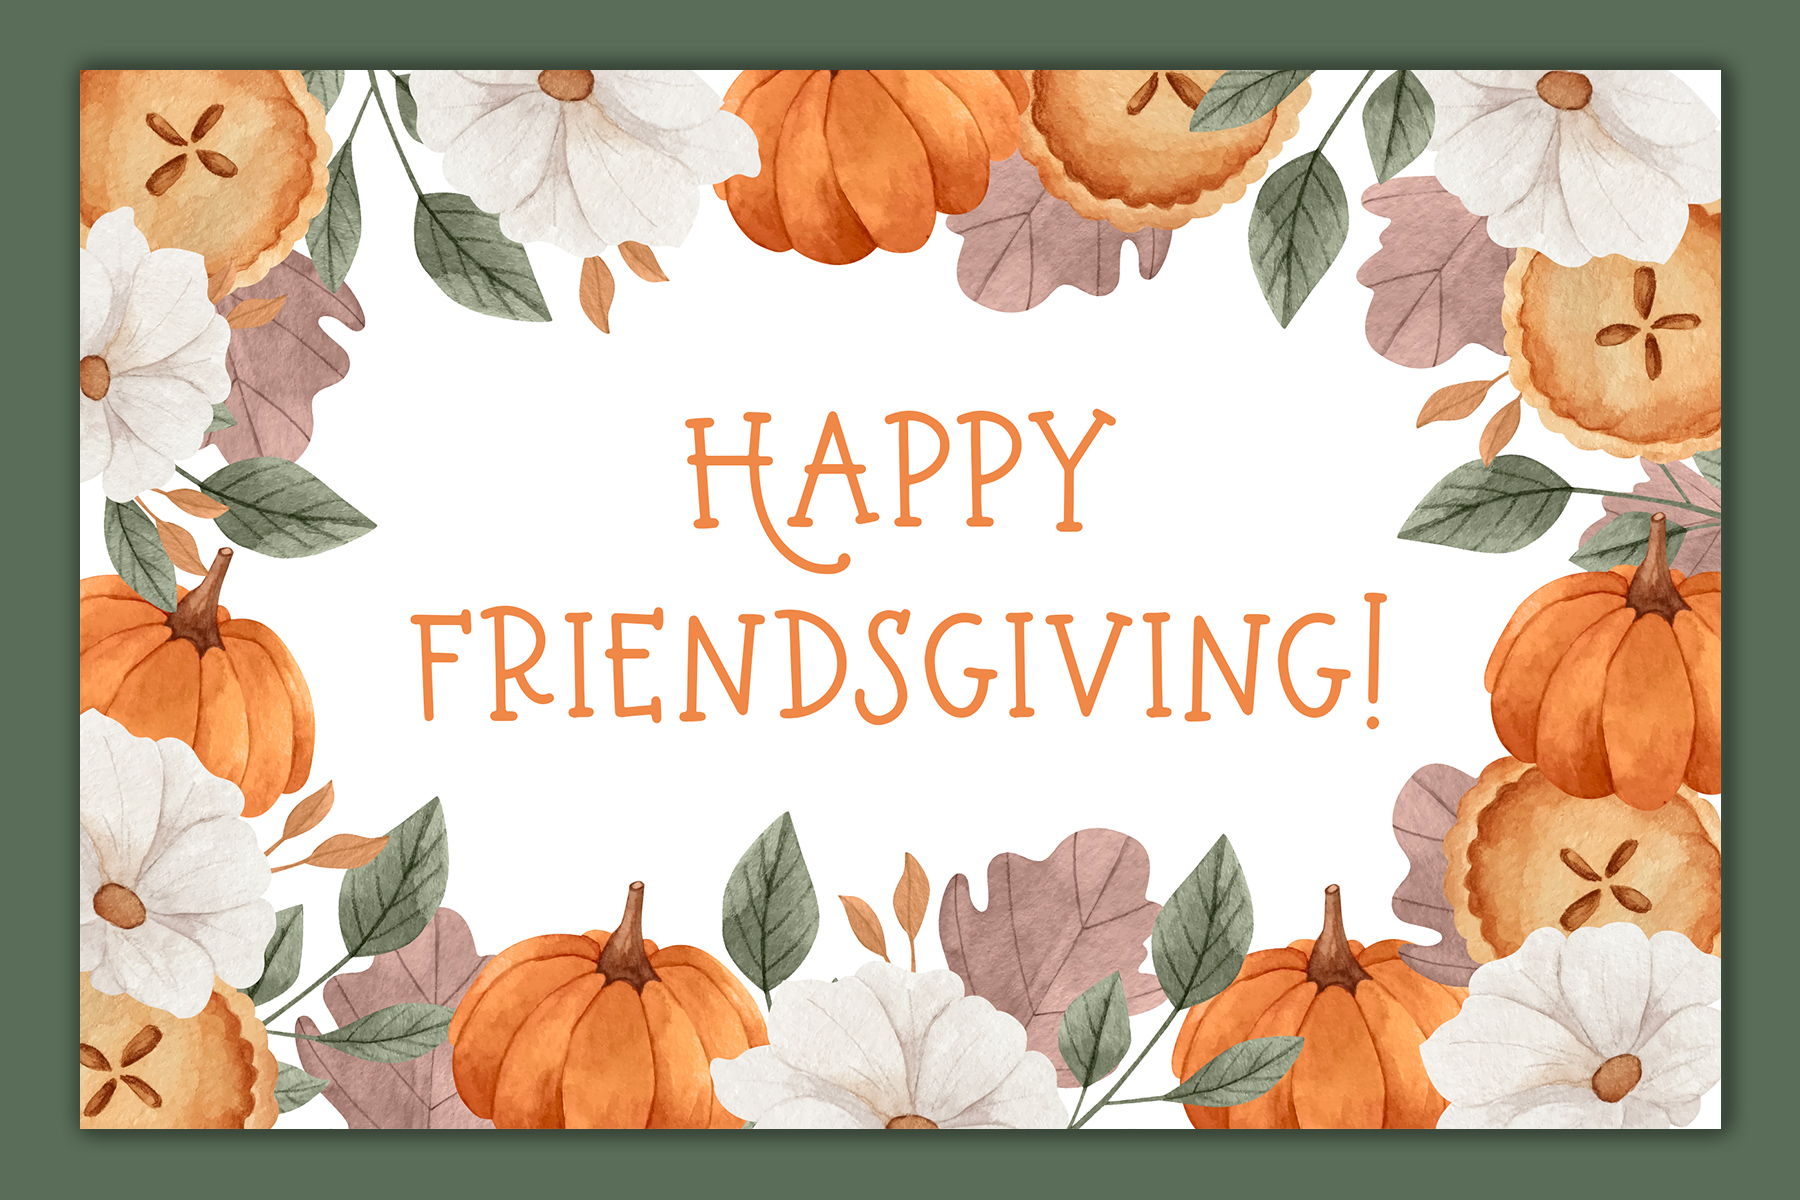 This image shows one of the free Thanksgiving cards you can get from the thanksgiving cards printable set. This card says Happy Friendsgiving! It is surrounded by pumpkins, flowers, pies, and leaves.